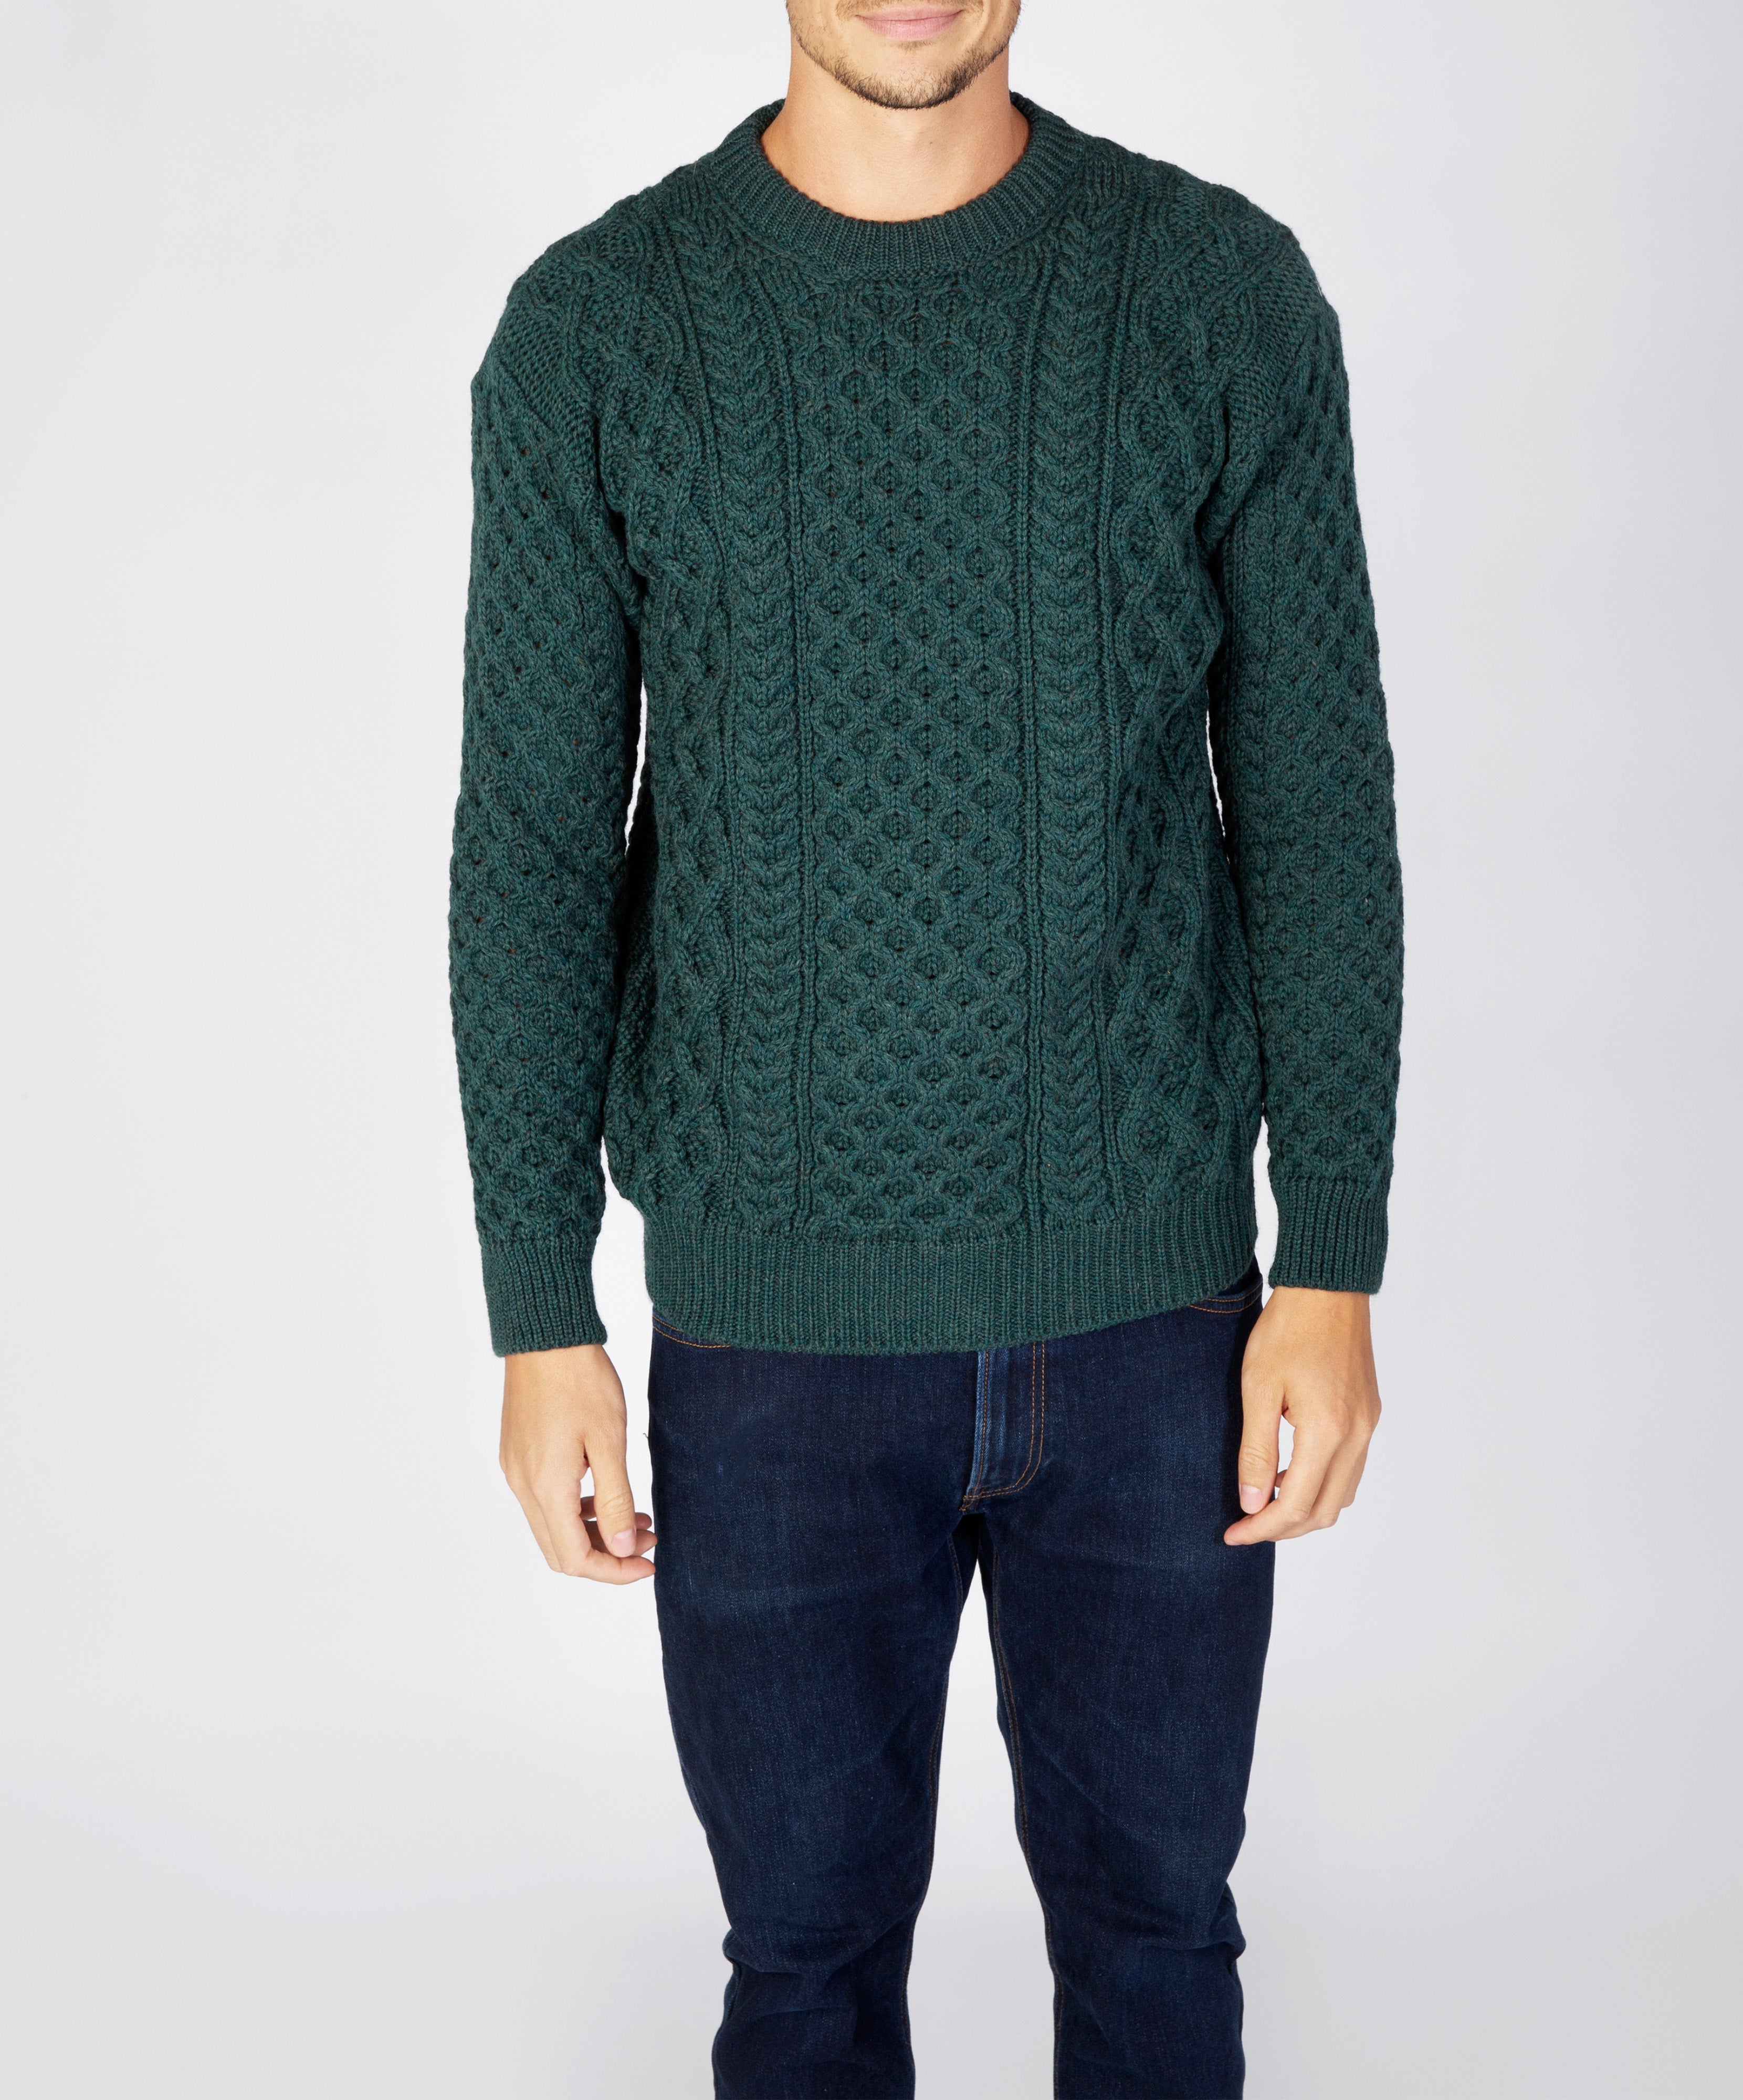 Traditional Aran Sweaters for Men | Designed and Made in Ireland